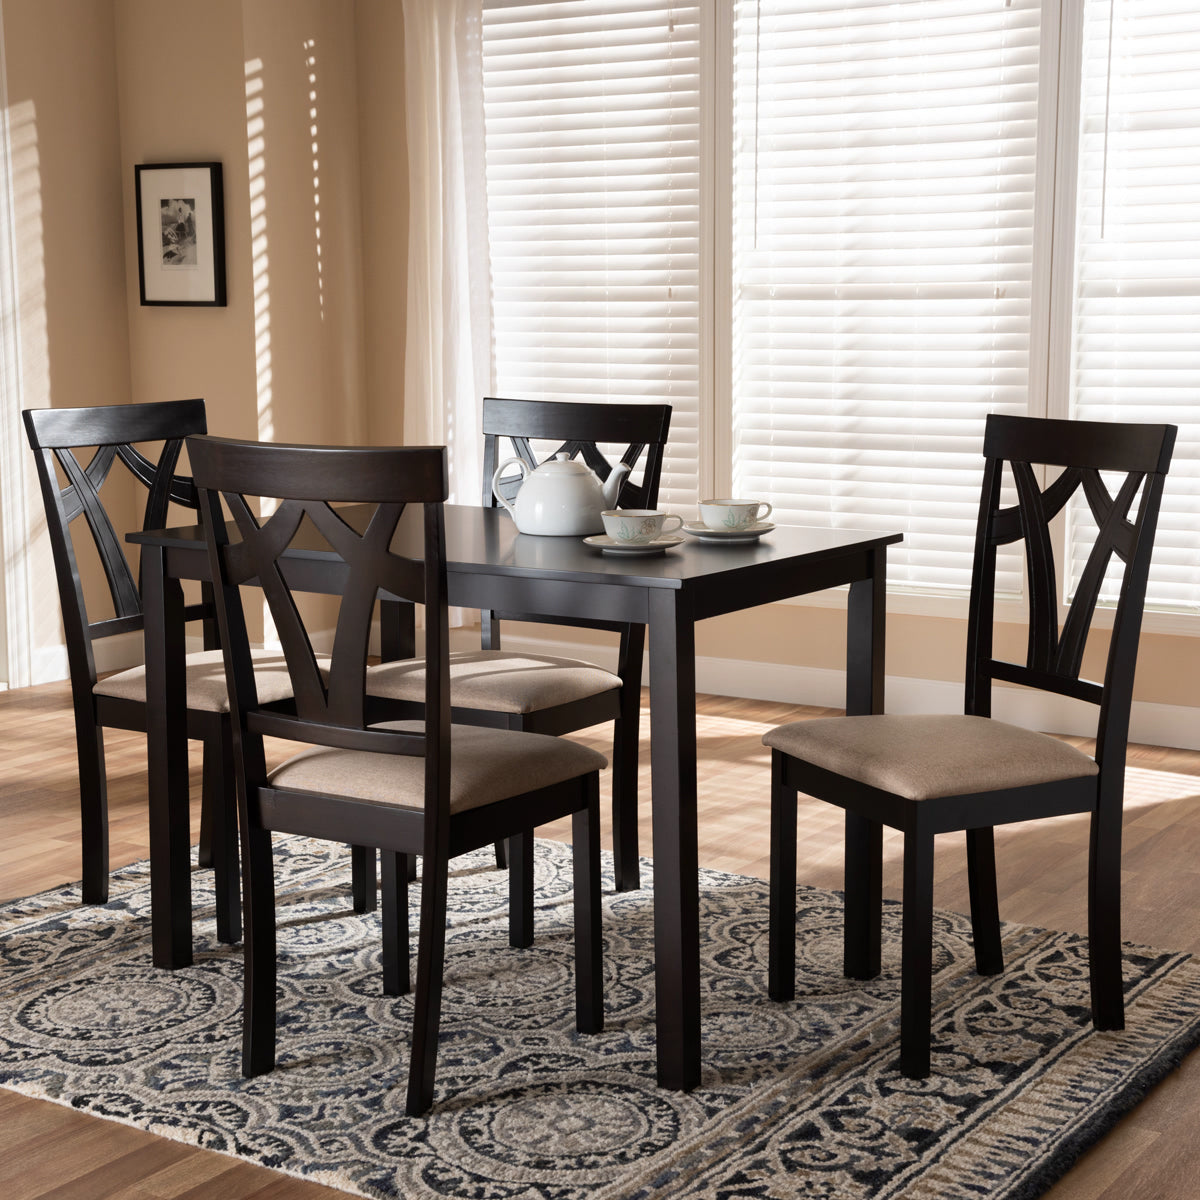 Baxton Studio Sylvia Modern and Contemporary Espresso Brown Finished and Sand Fabric Upholstered 5-Piece Dining Set Baxton Studio-0-Minimal And Modern - 2